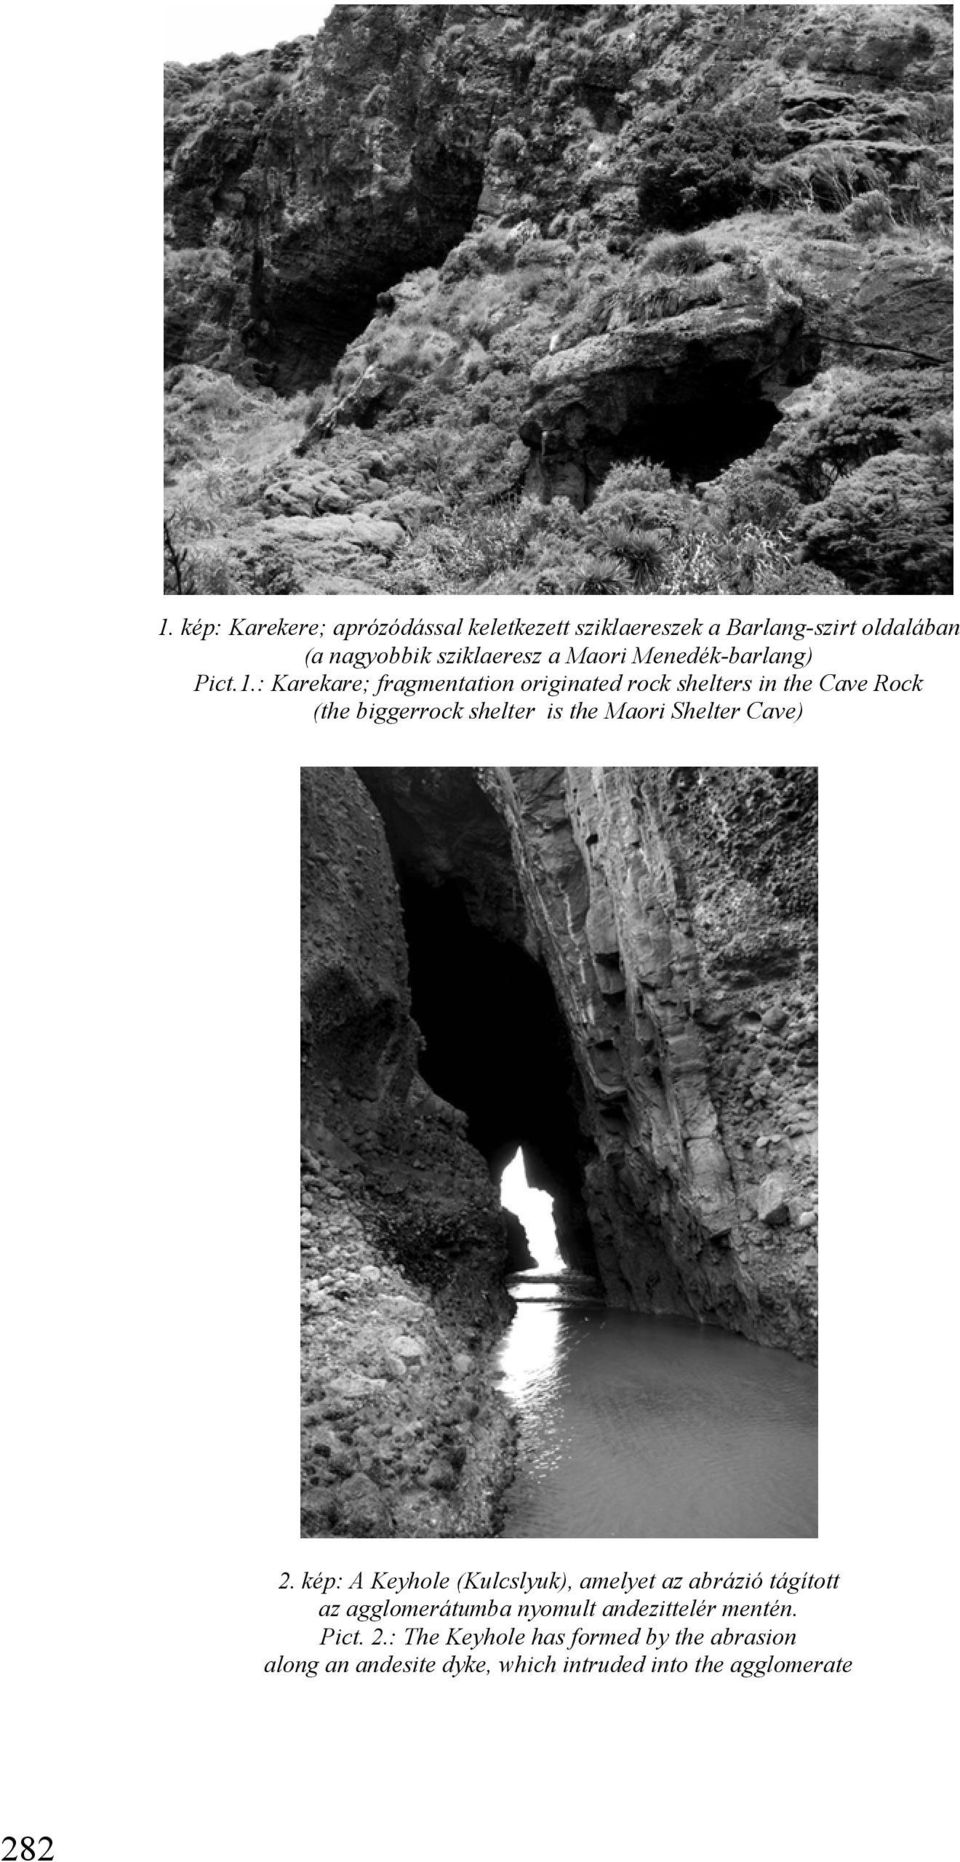 : Karekare; fragmentation originated rock shelters in the Cave Rock (the biggerrock shelter is the Maori Shelter Cave)